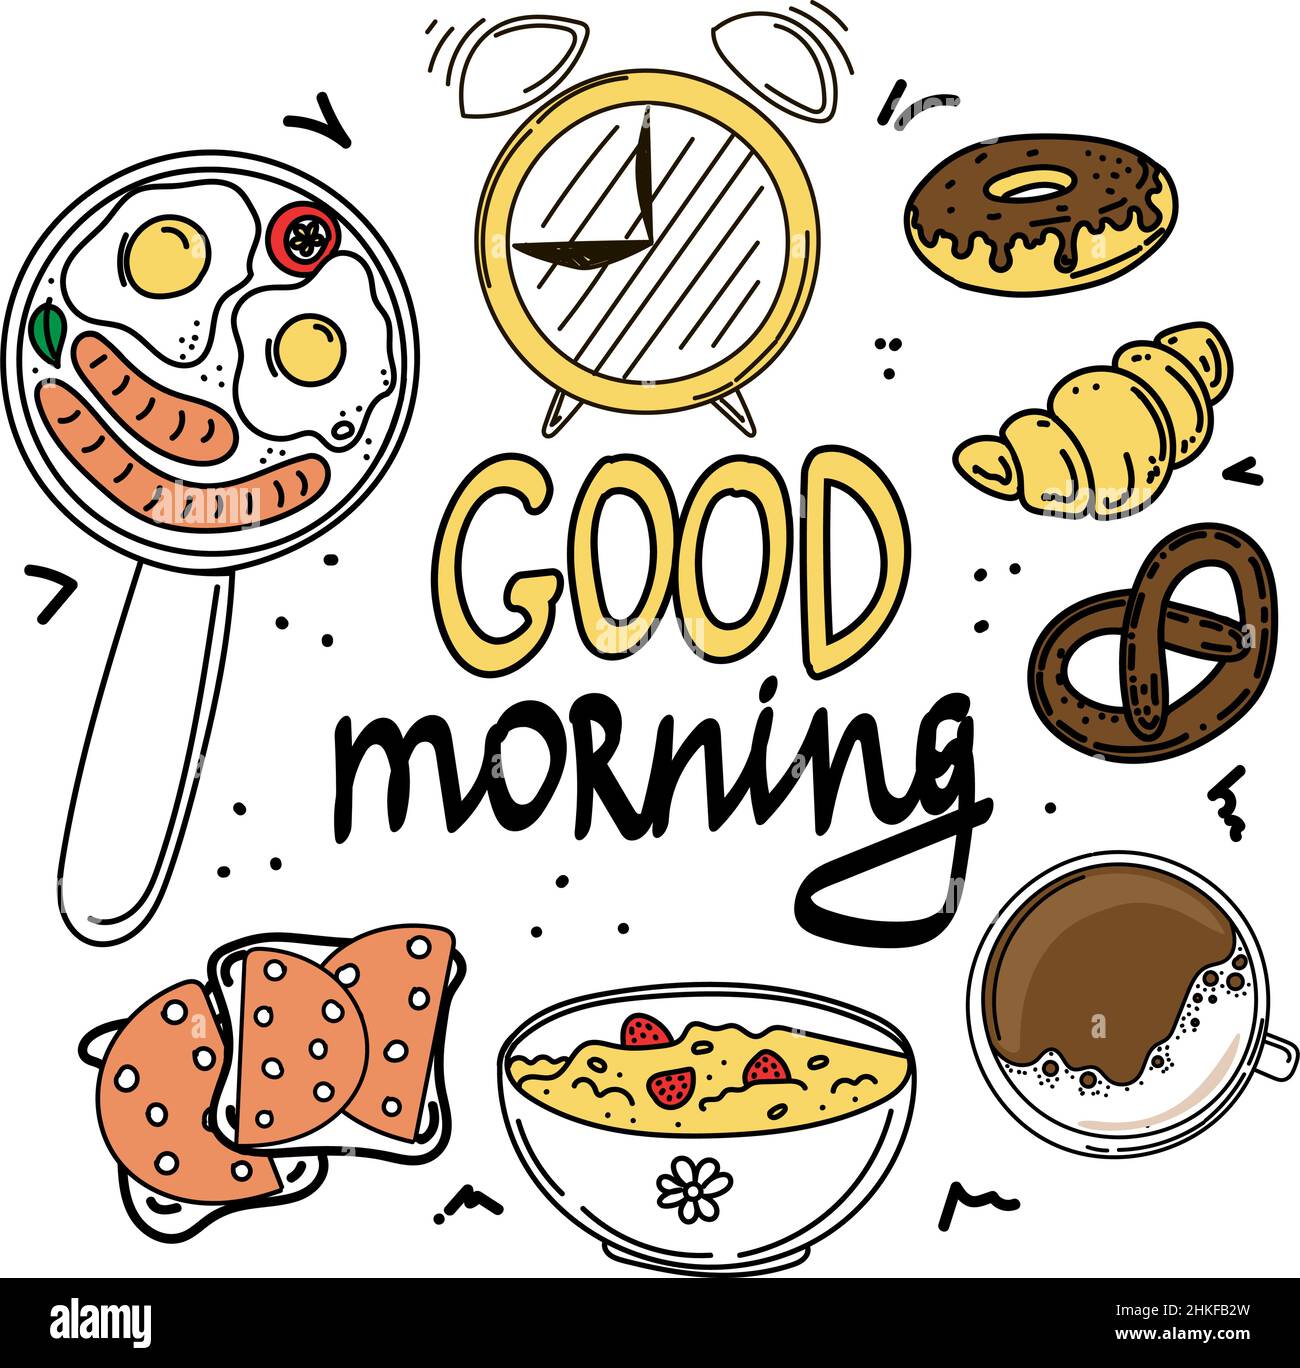 Morning meal, hand-drawn doodle-style elements. Time to get up ...